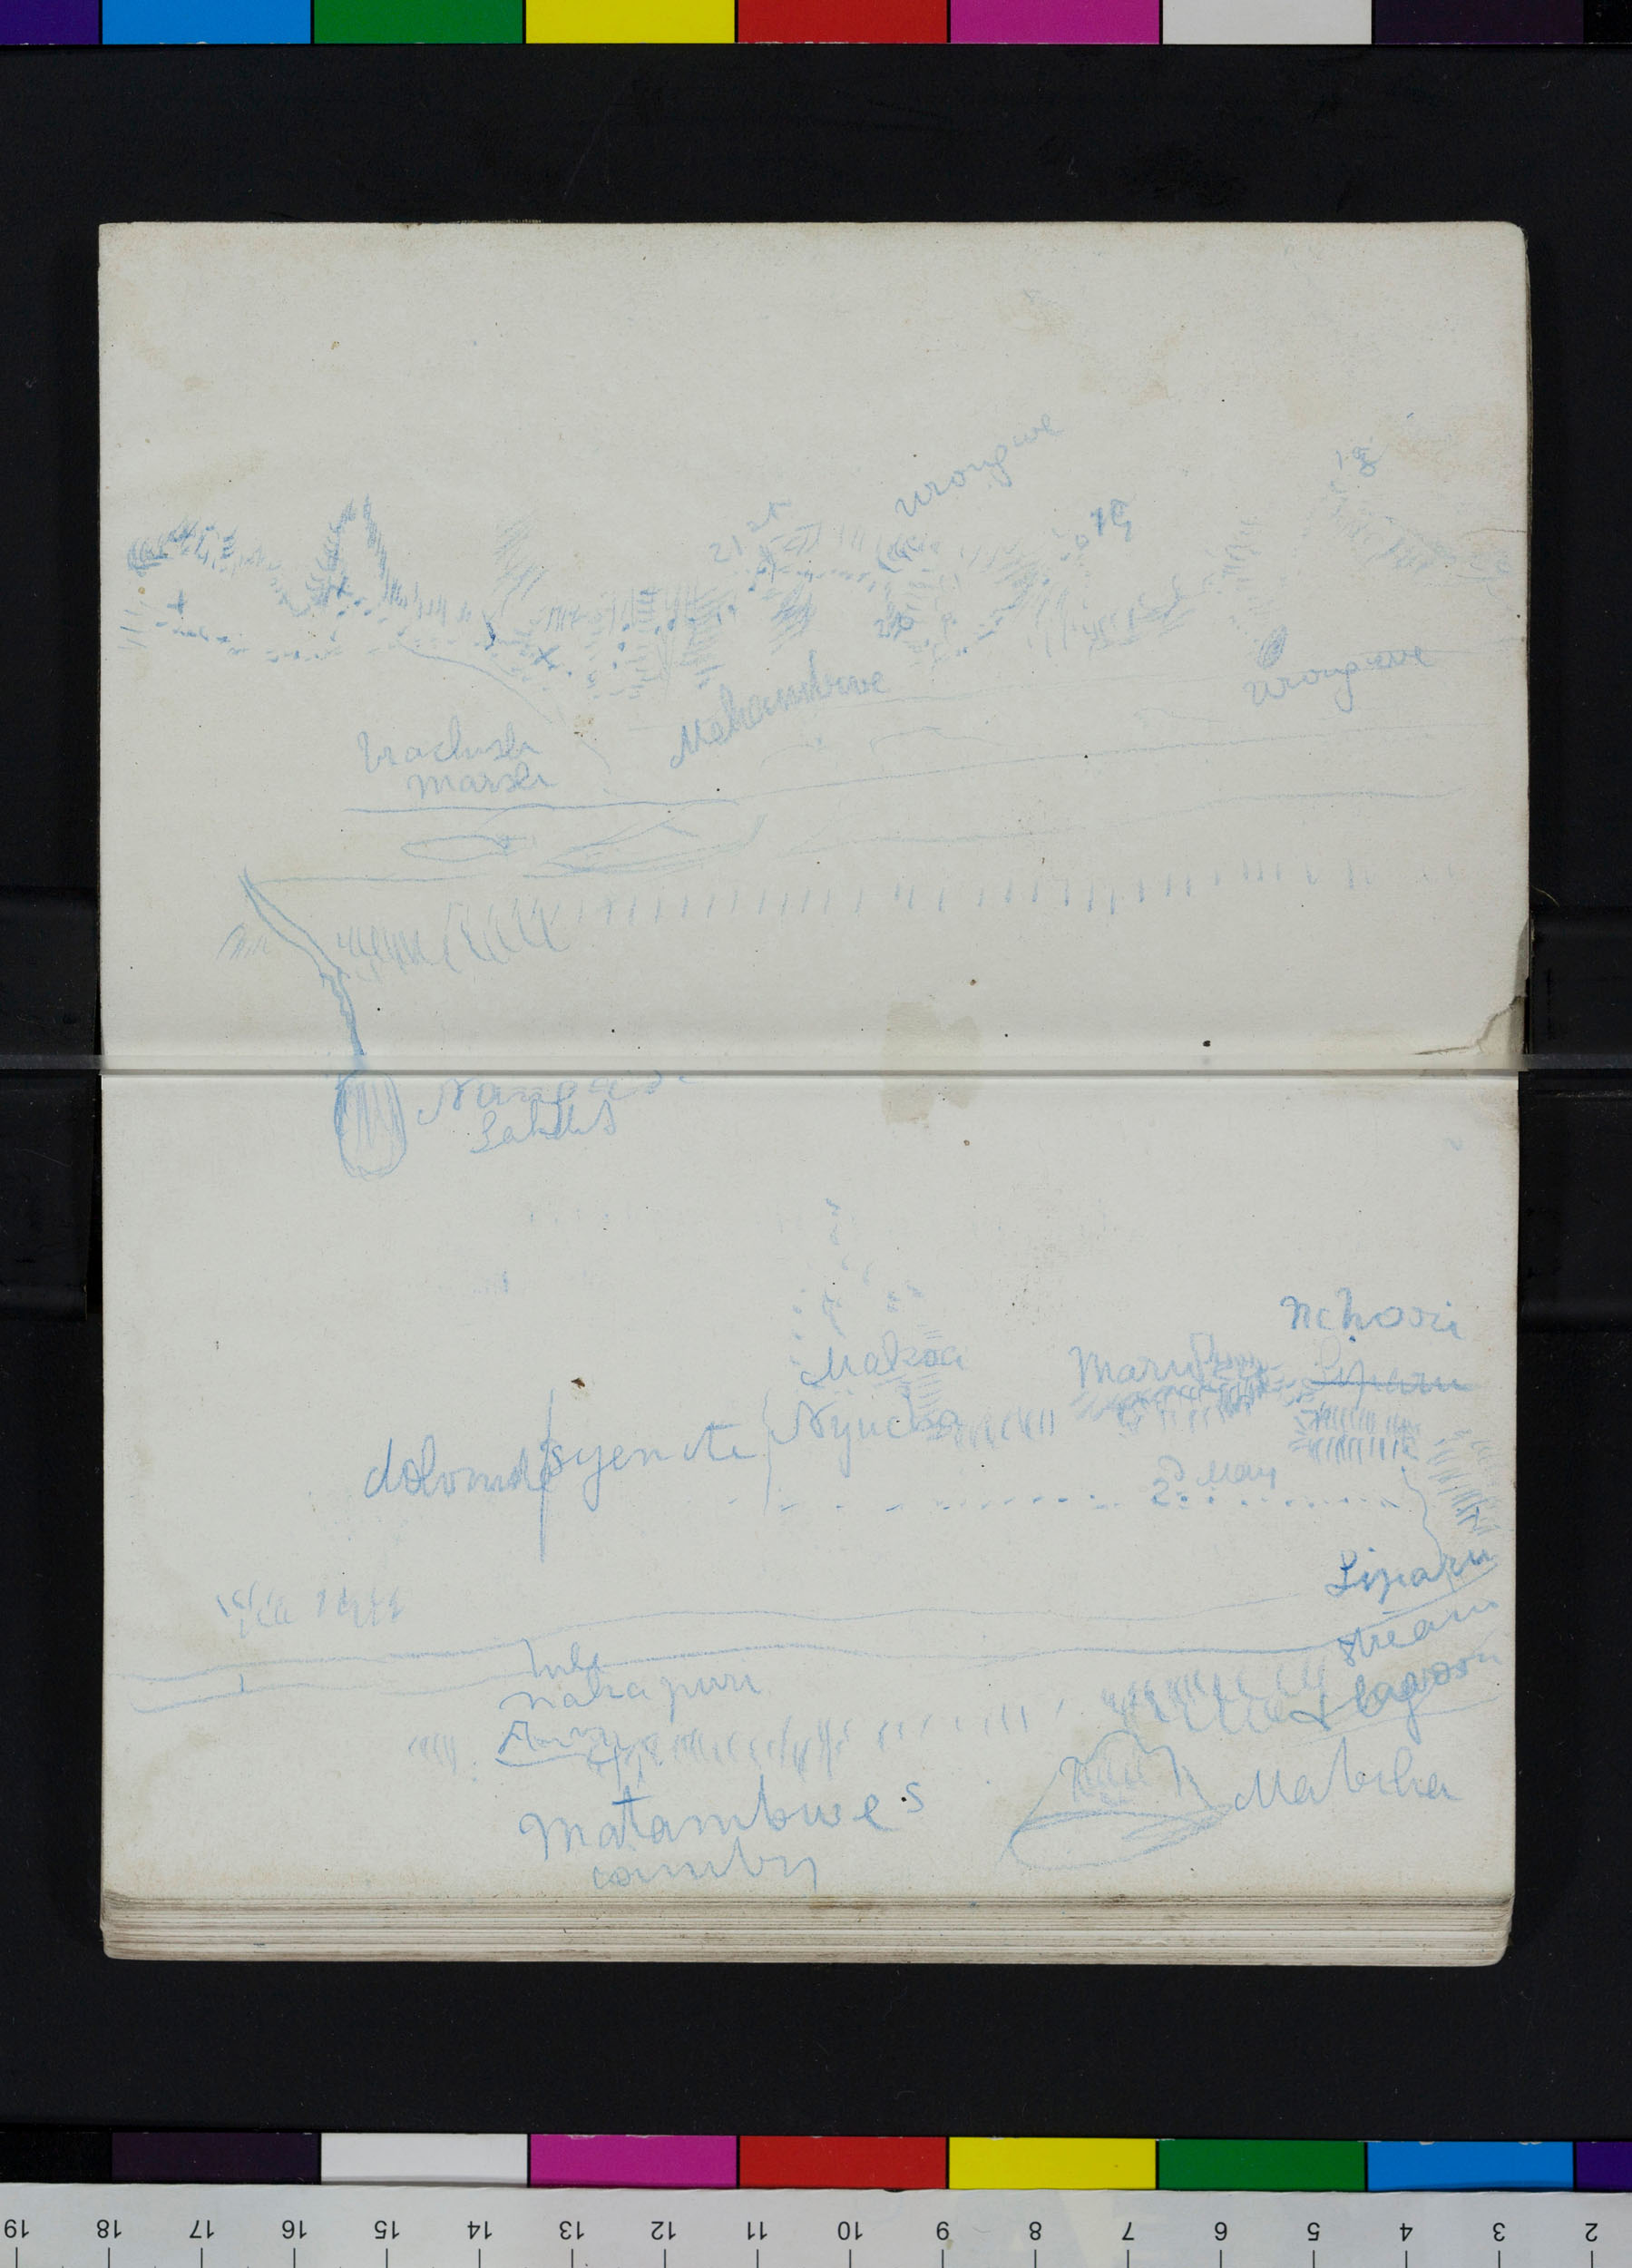 An image of two pages of Field Diary II (Livingstone 1866a:[106]-[107]). Copyright David Livingstone Centre. Creative Commons Attribution-NonCommercial 3.0 Unported (https://creativecommons.org/licenses/by-nc/3.0/).